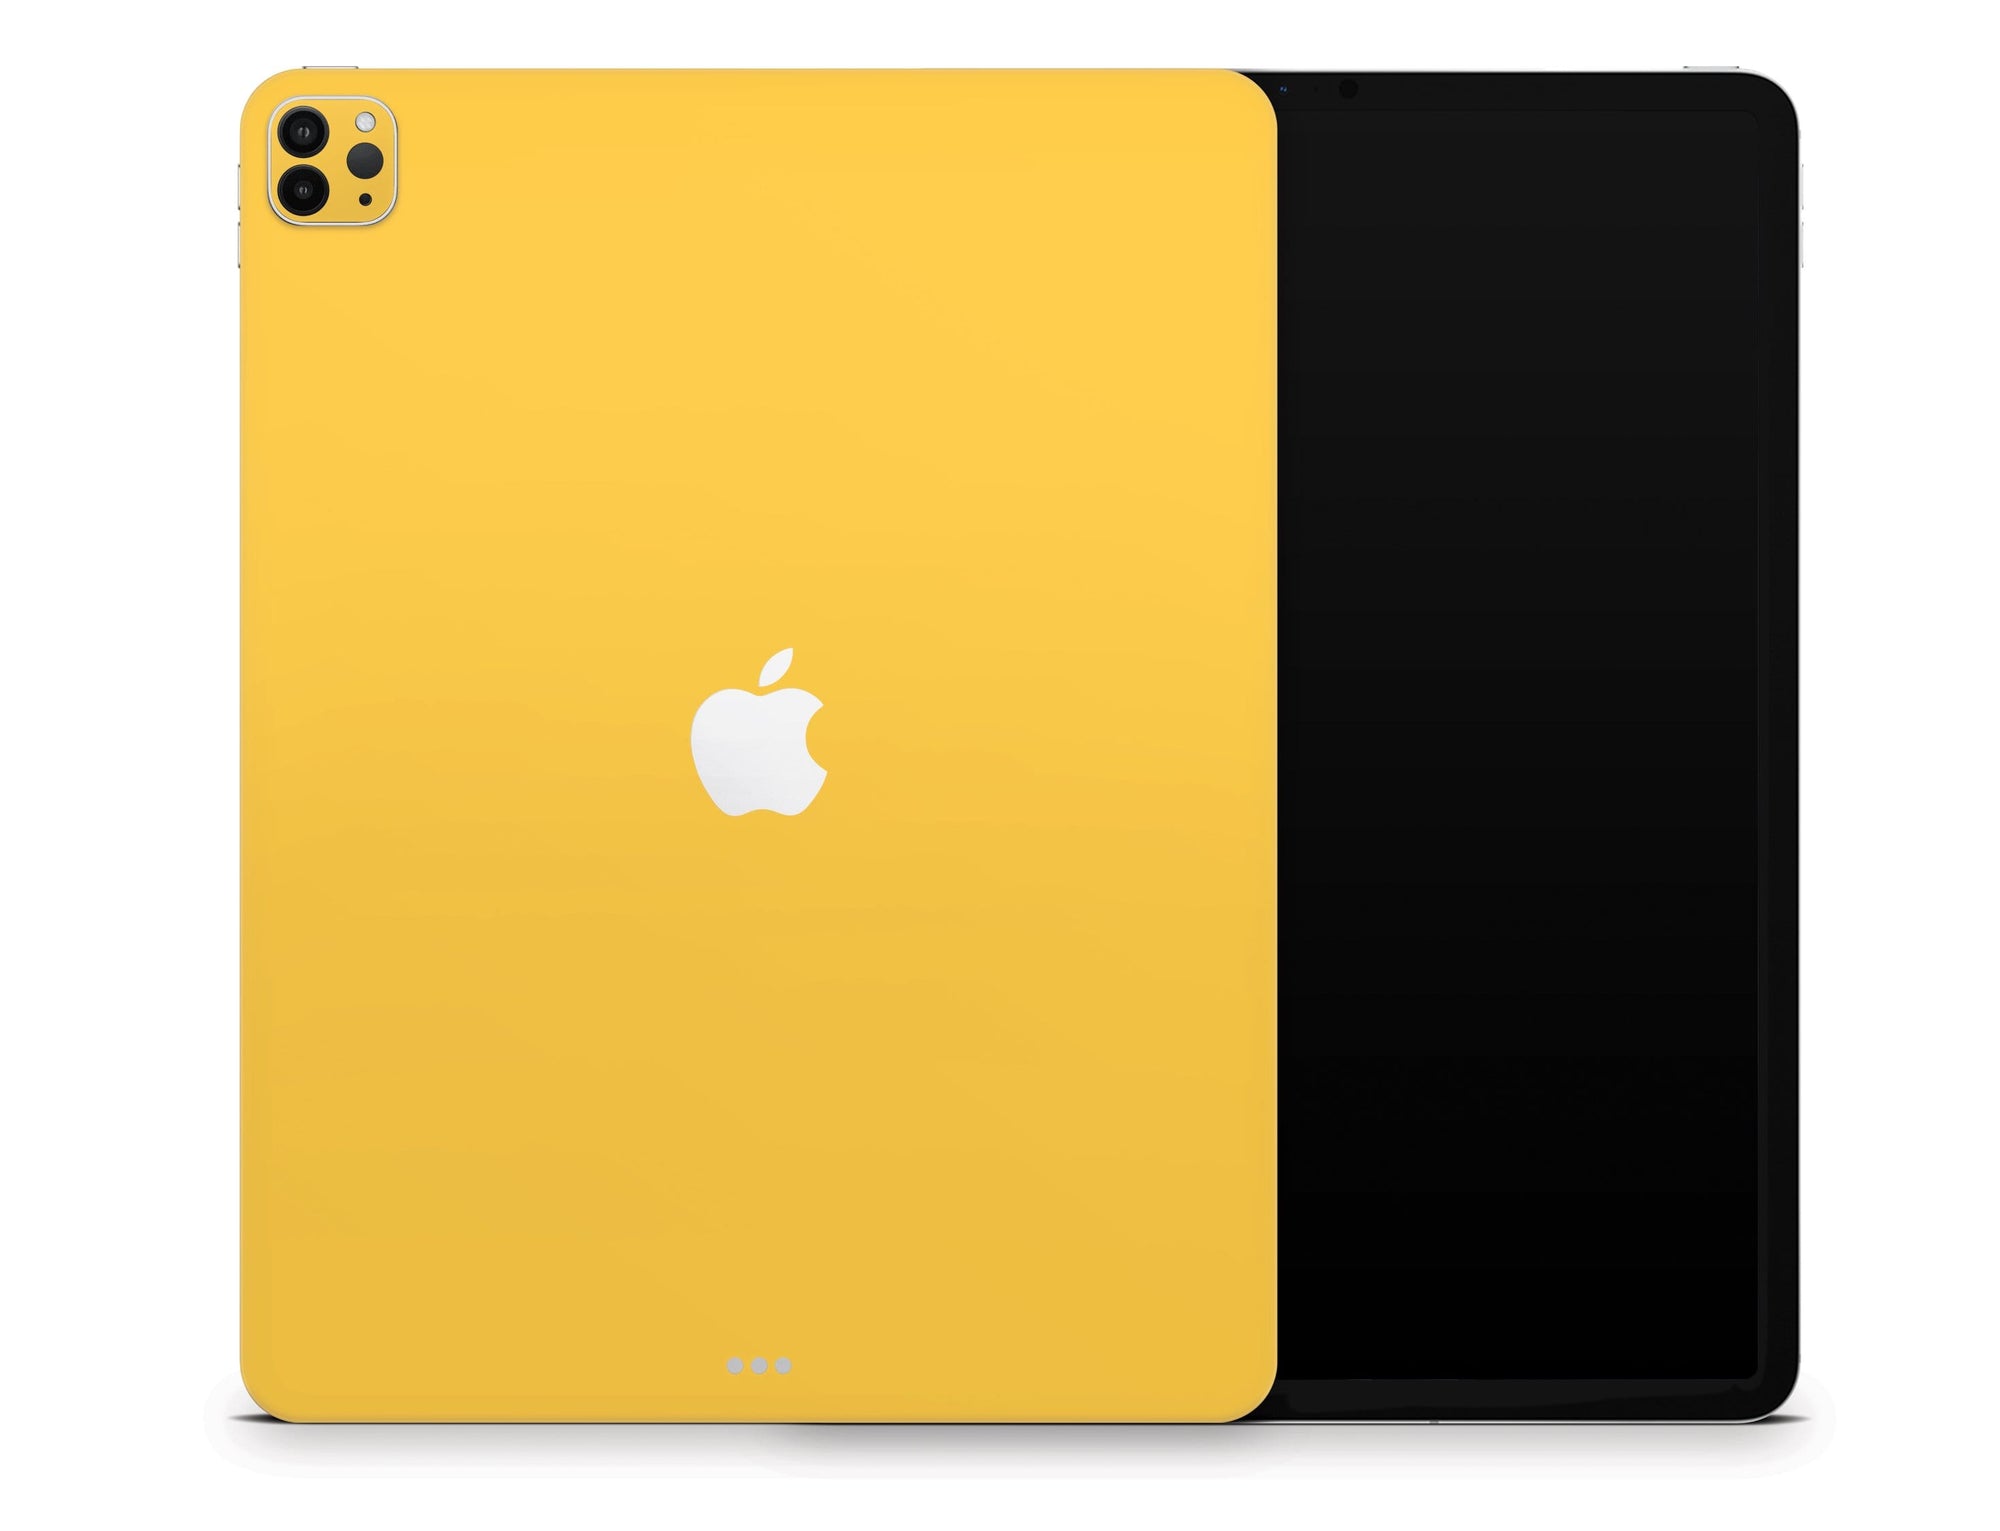 Classic Solid Color iPad Pro 12.9 Series Skin